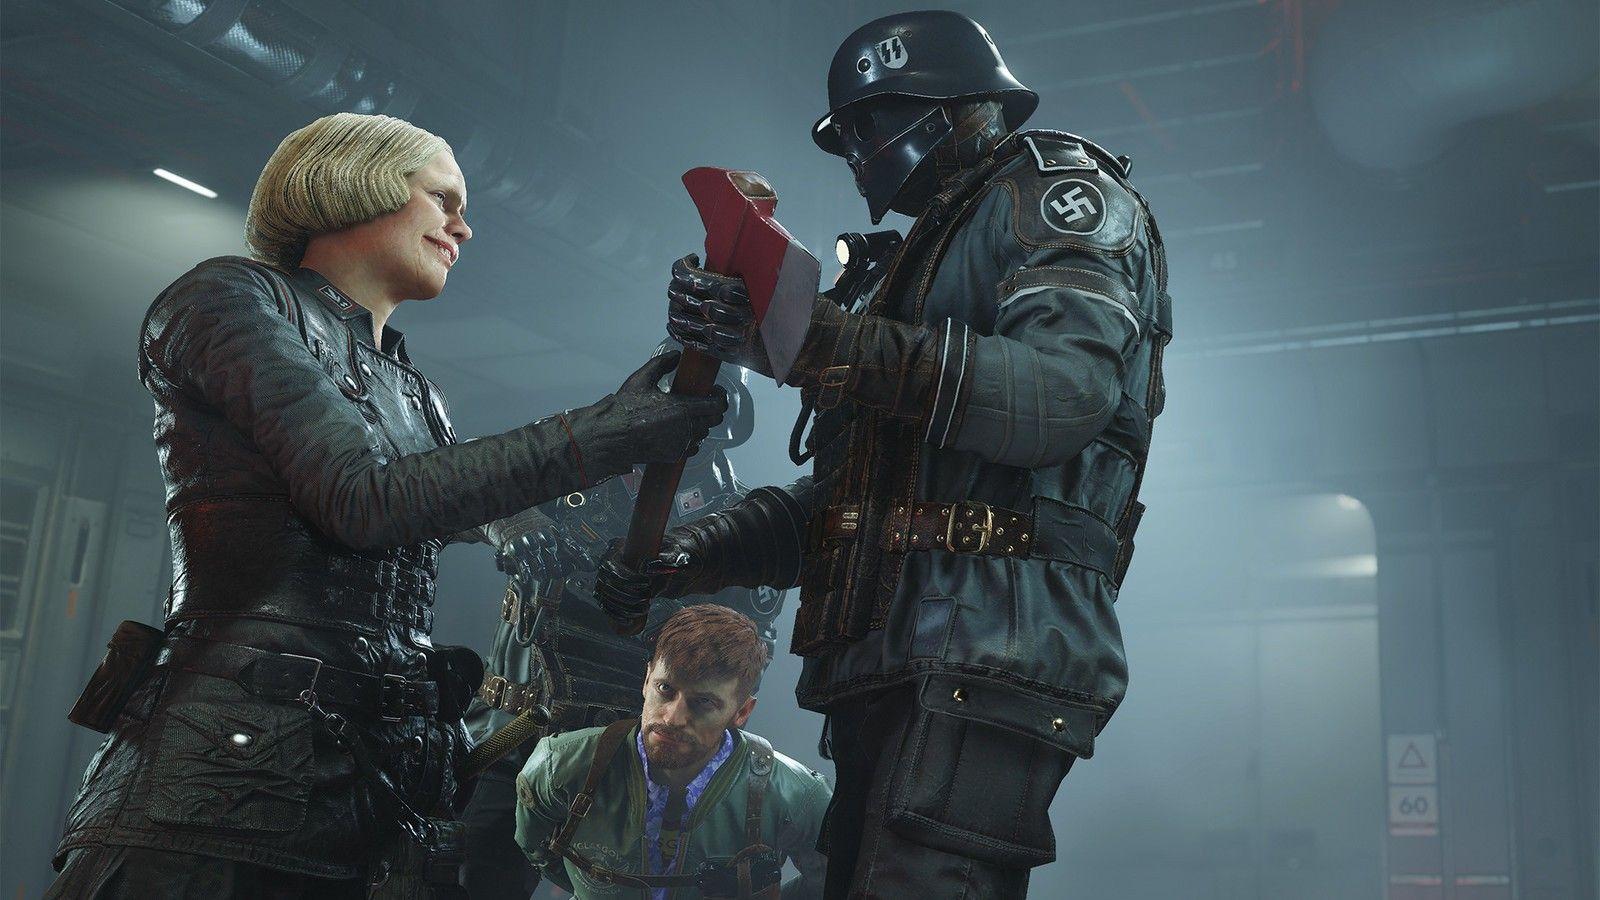 Wolfenstein II: The New Colossus will run at 4K with HDR on Xbox One